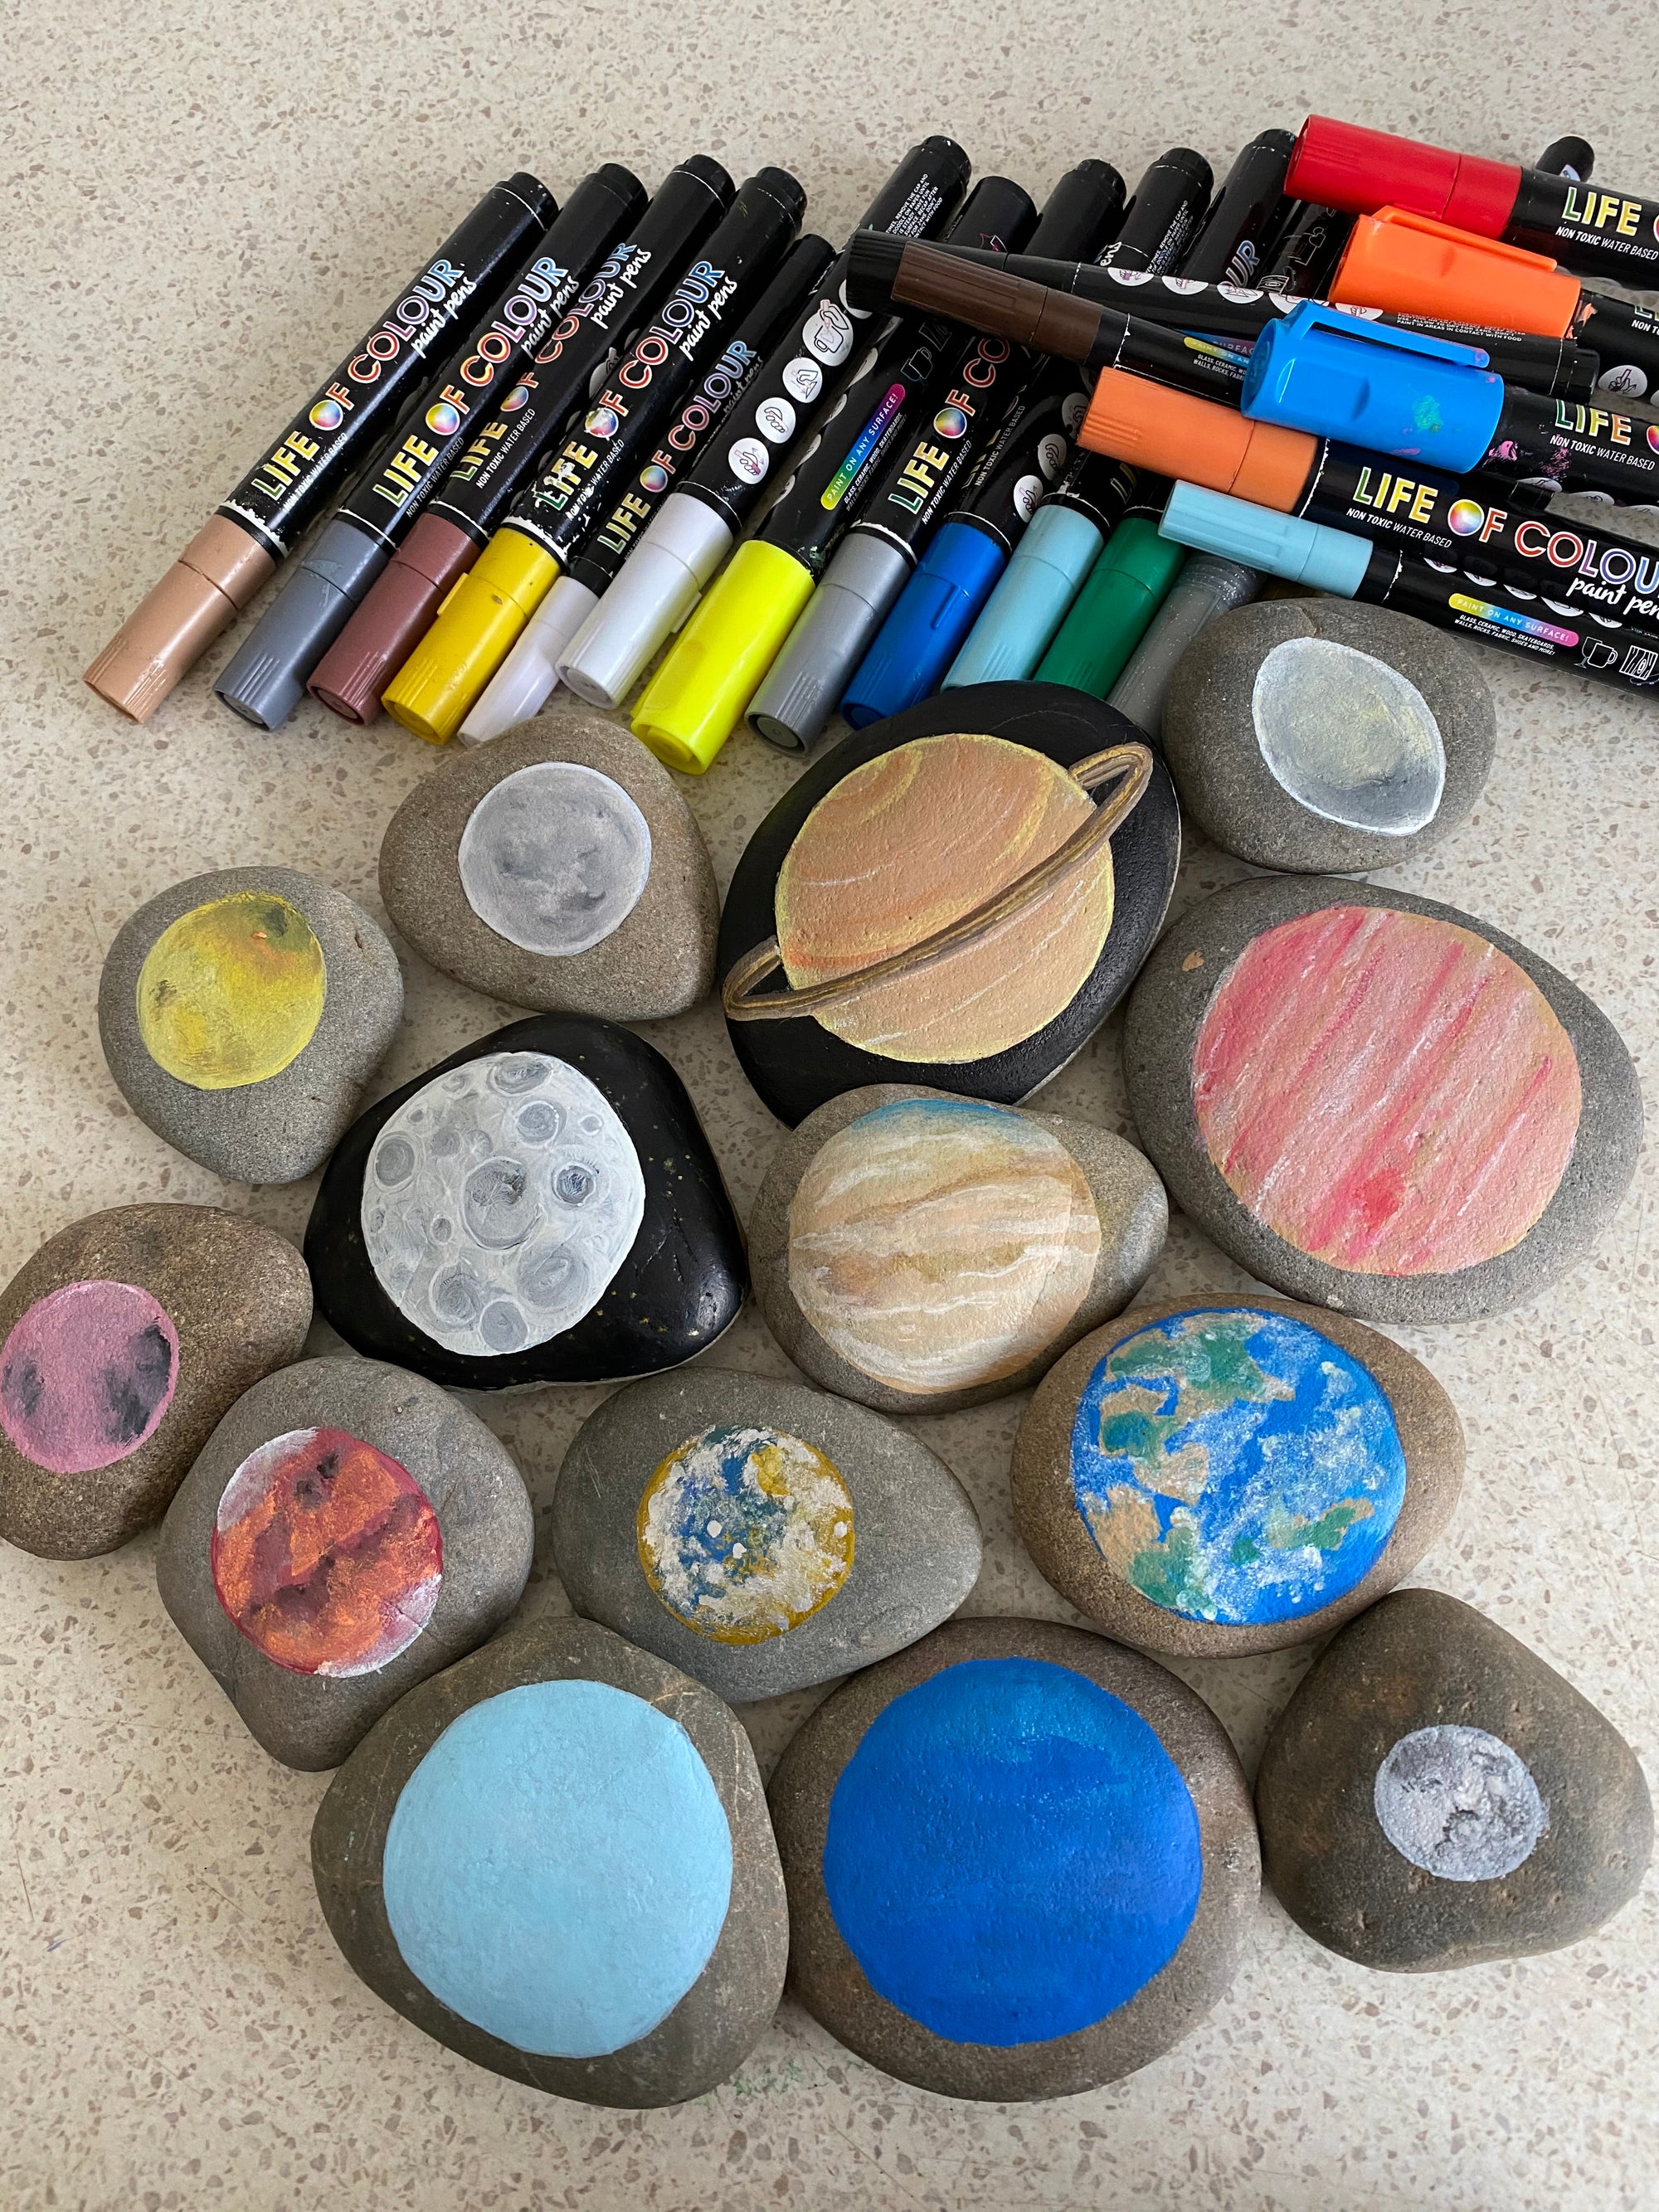 How to paint "Planets of the Solar System" Rocks